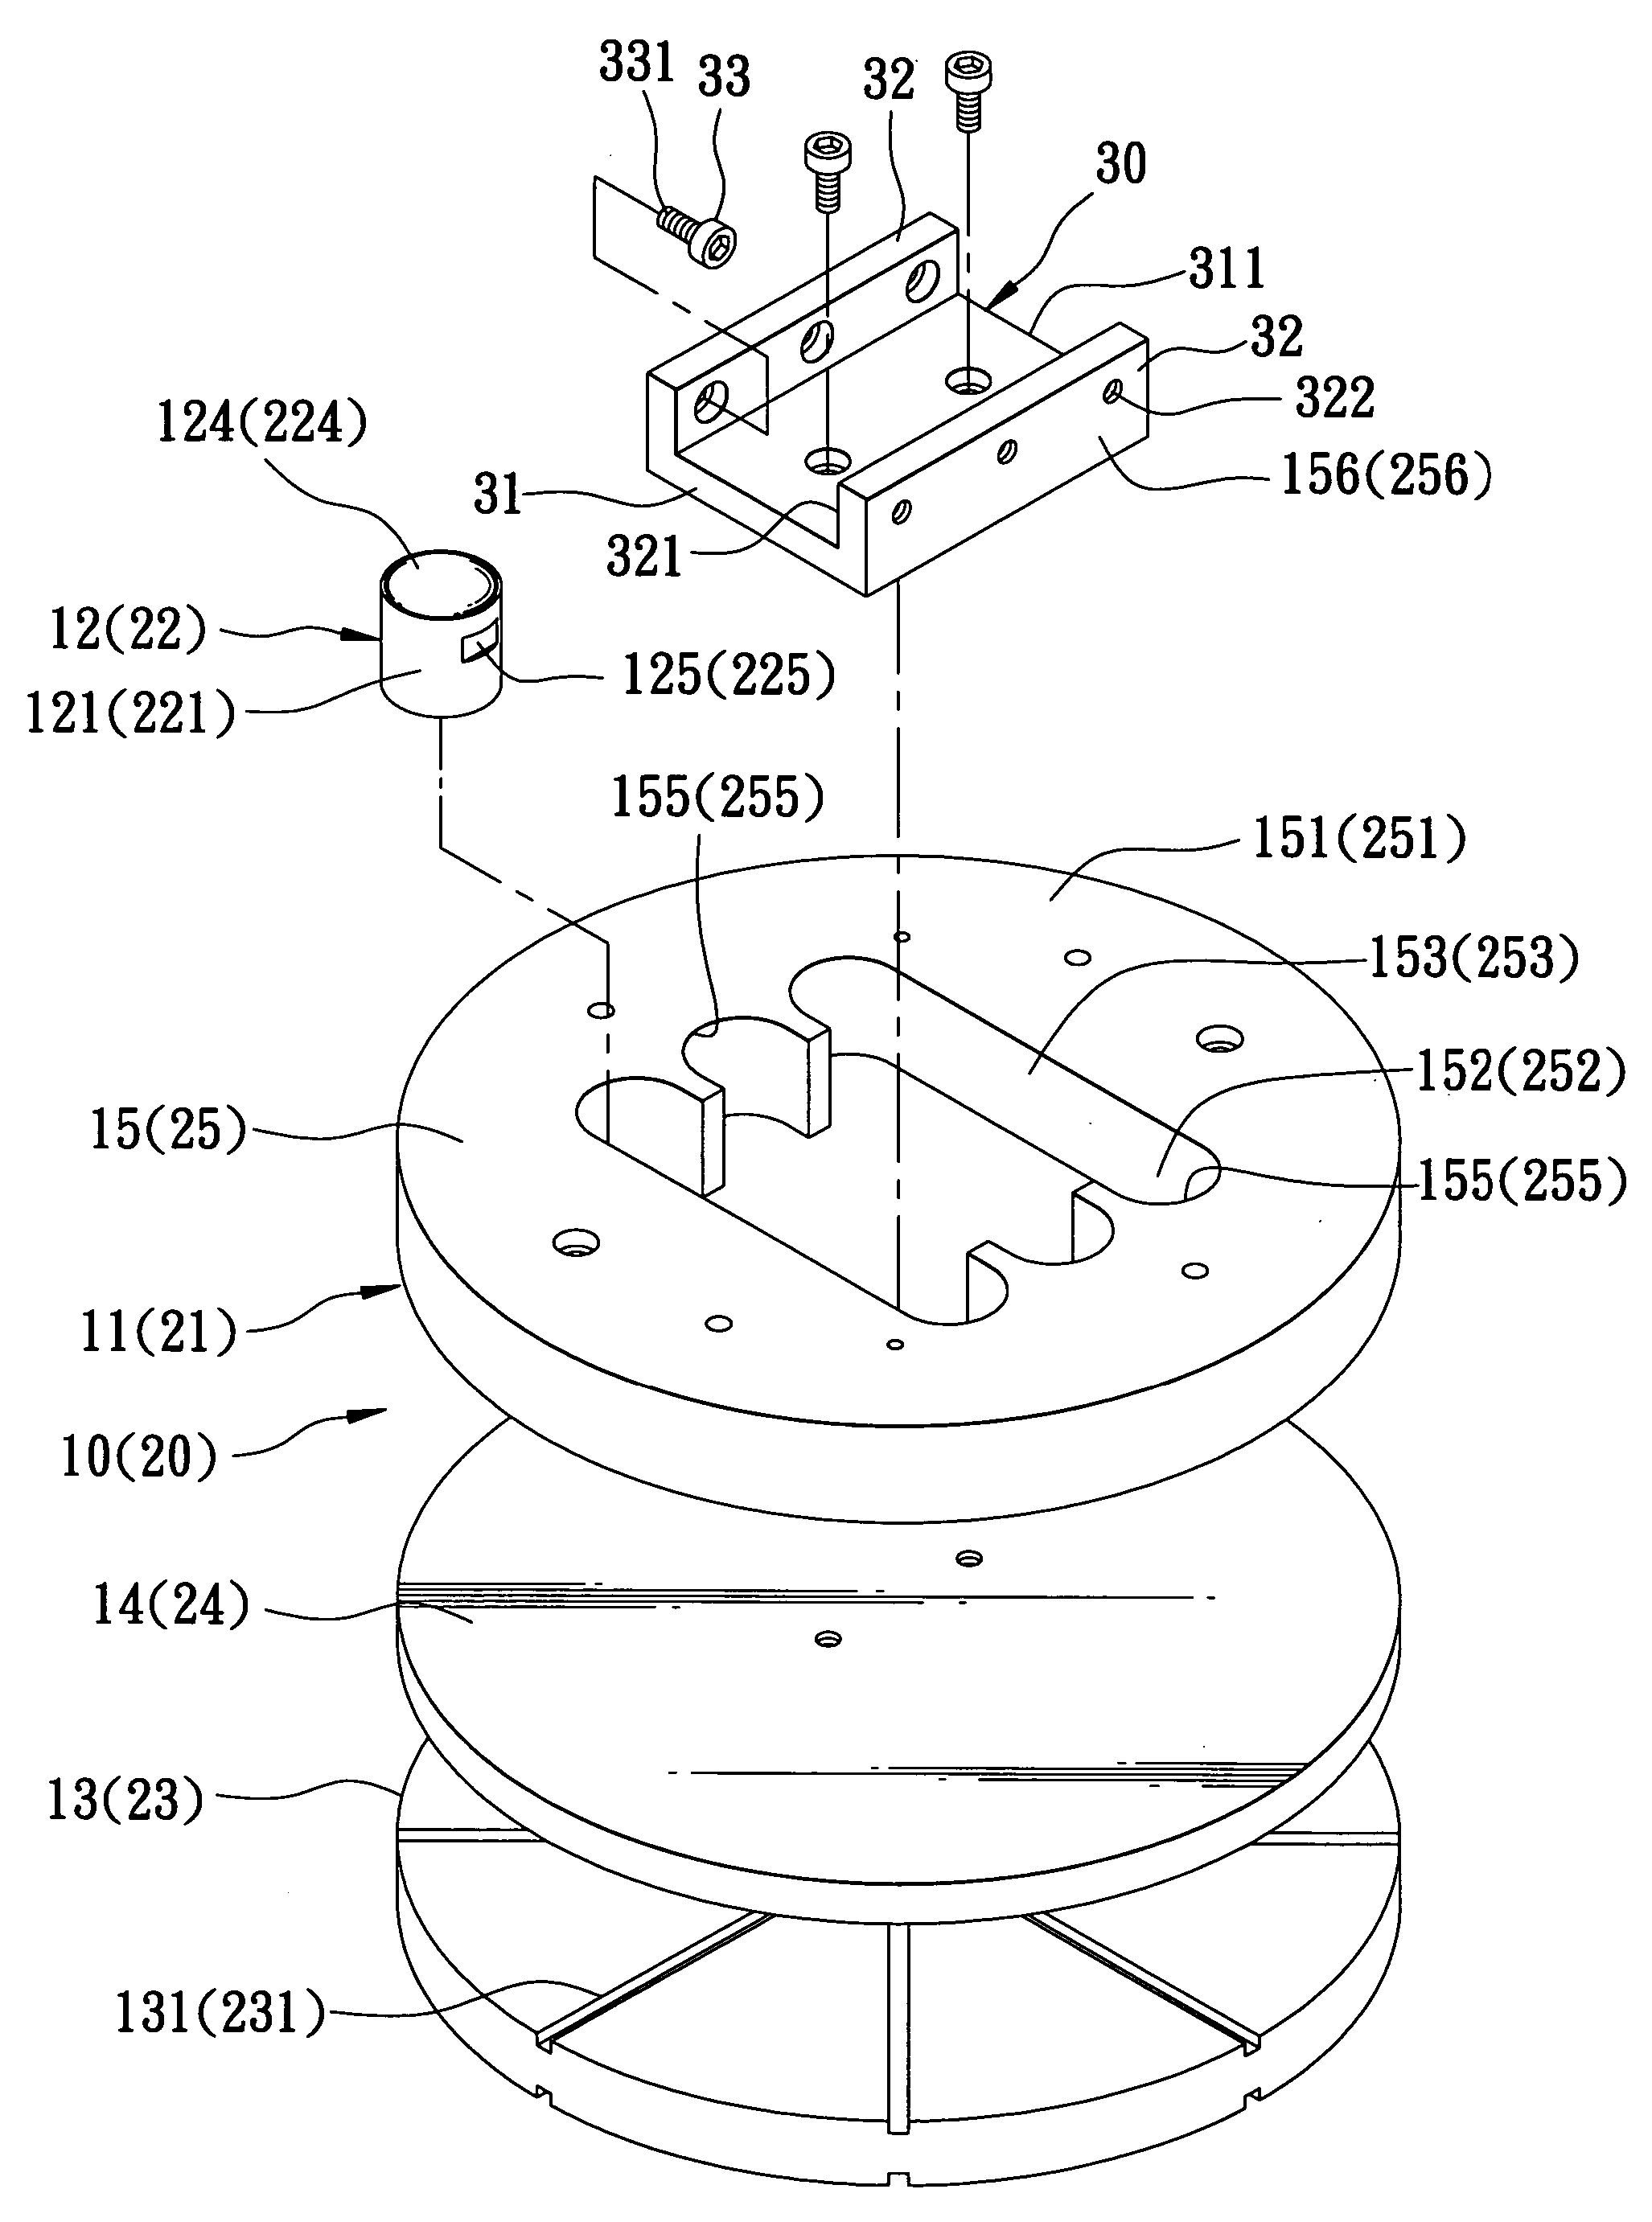 Molding apparatus with removable mold cores